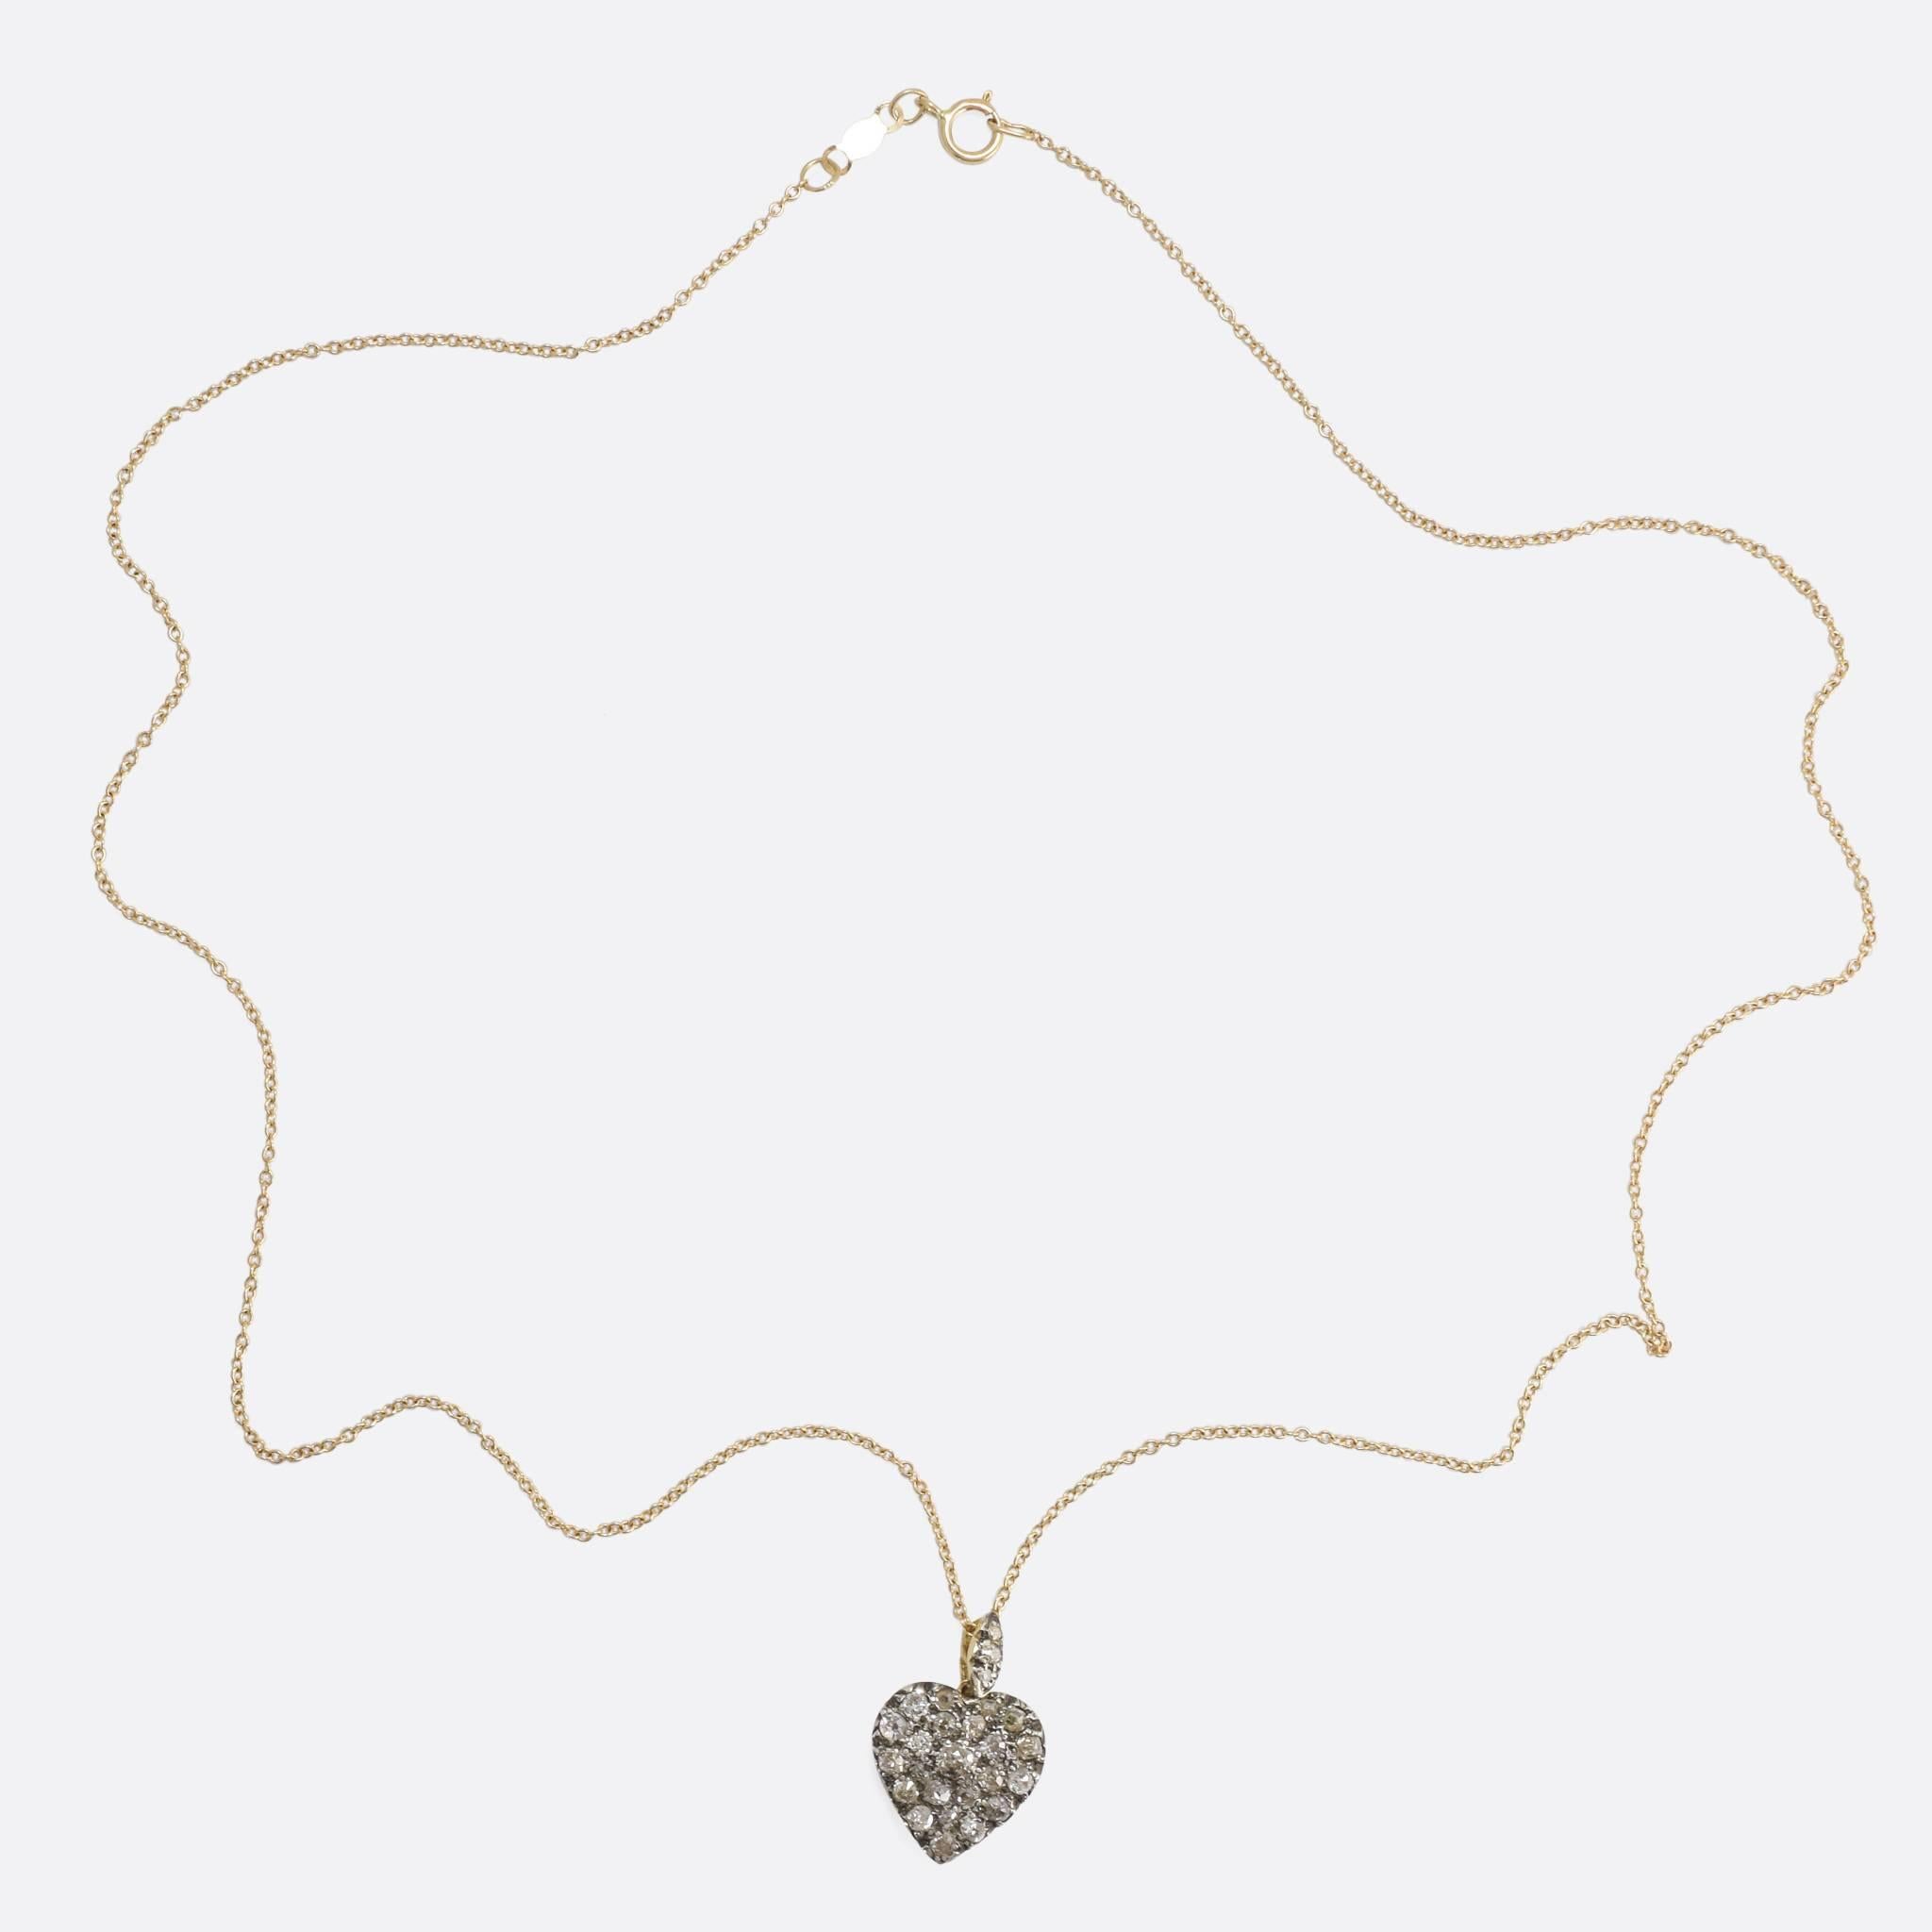 This beautiful Heart Pendant dates to c.1880, pavé set with old cut diamonds. Pavé translates literally as 